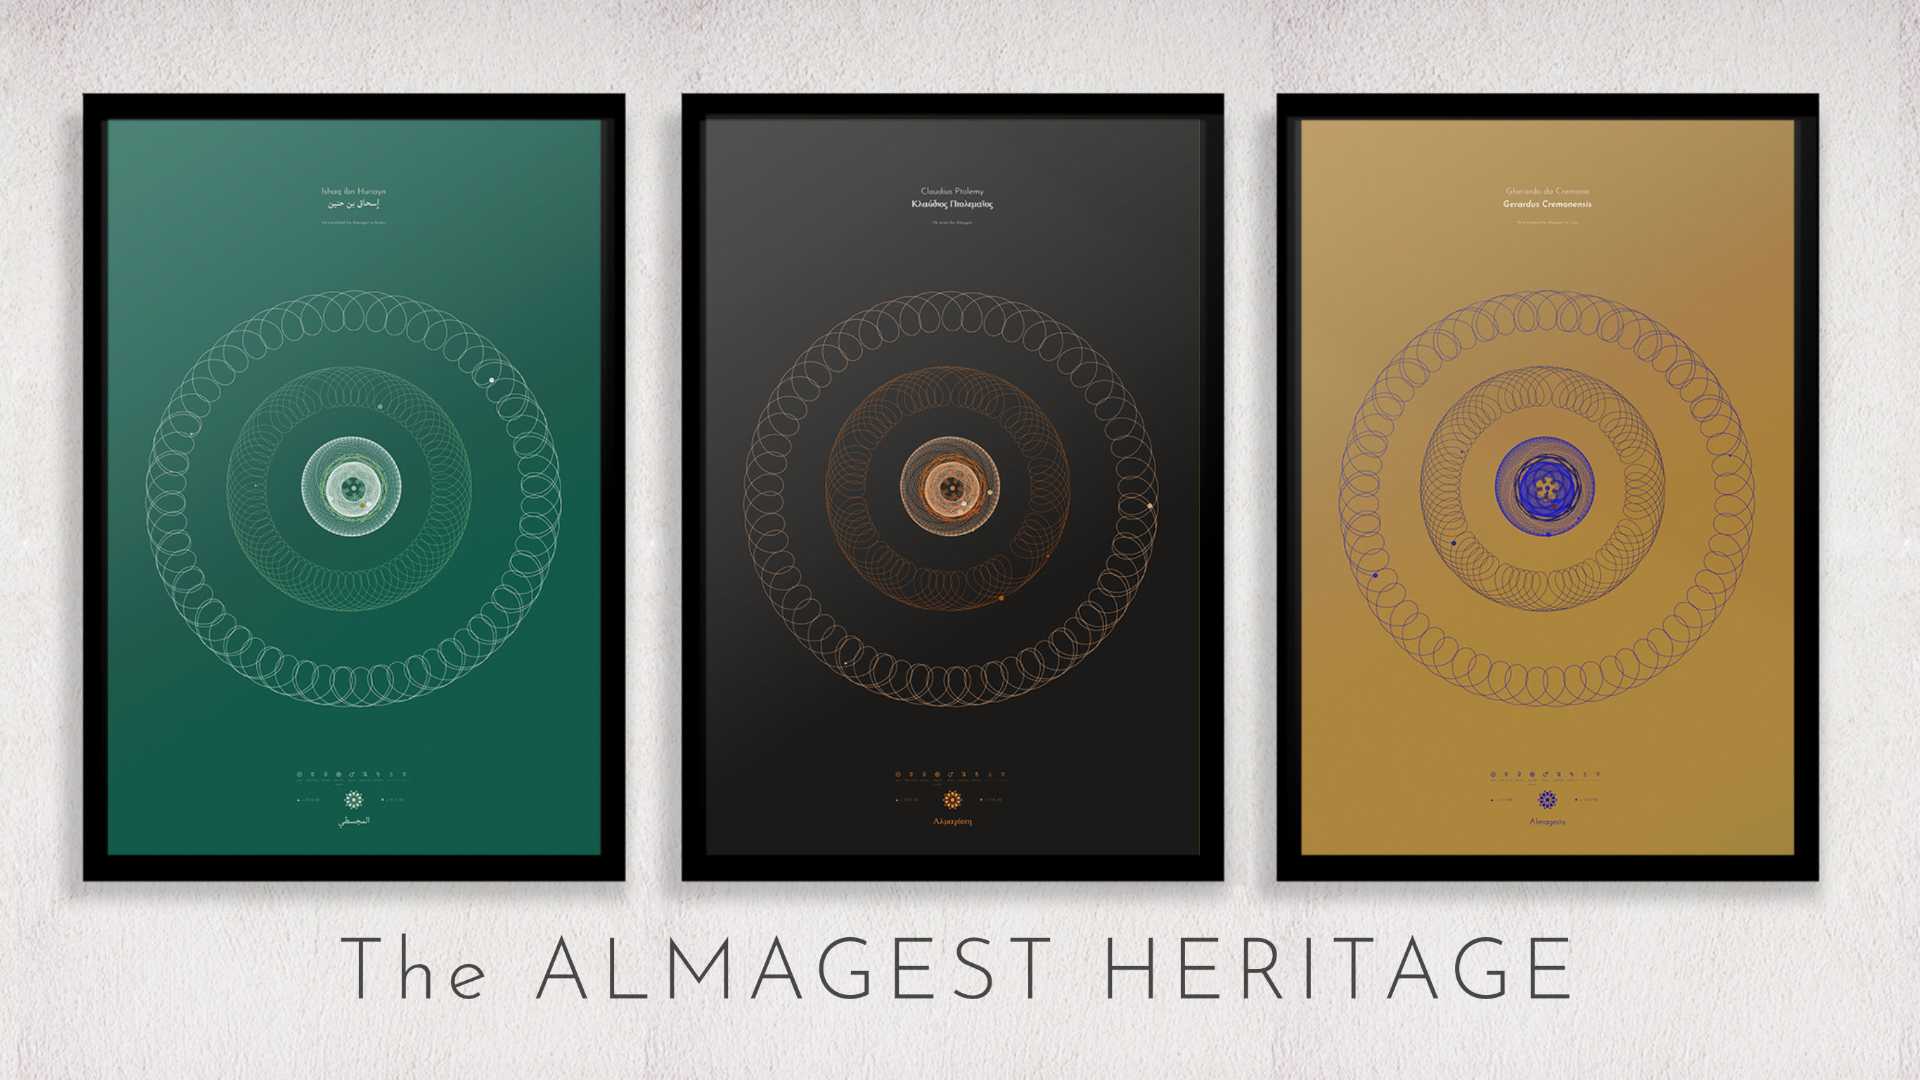 A special designed trio of posters to celebrate the history of the Almagest through the lives of Claudius Ptolemy, Ishaq Ibn Hunayn and Gerardo da Cremona.